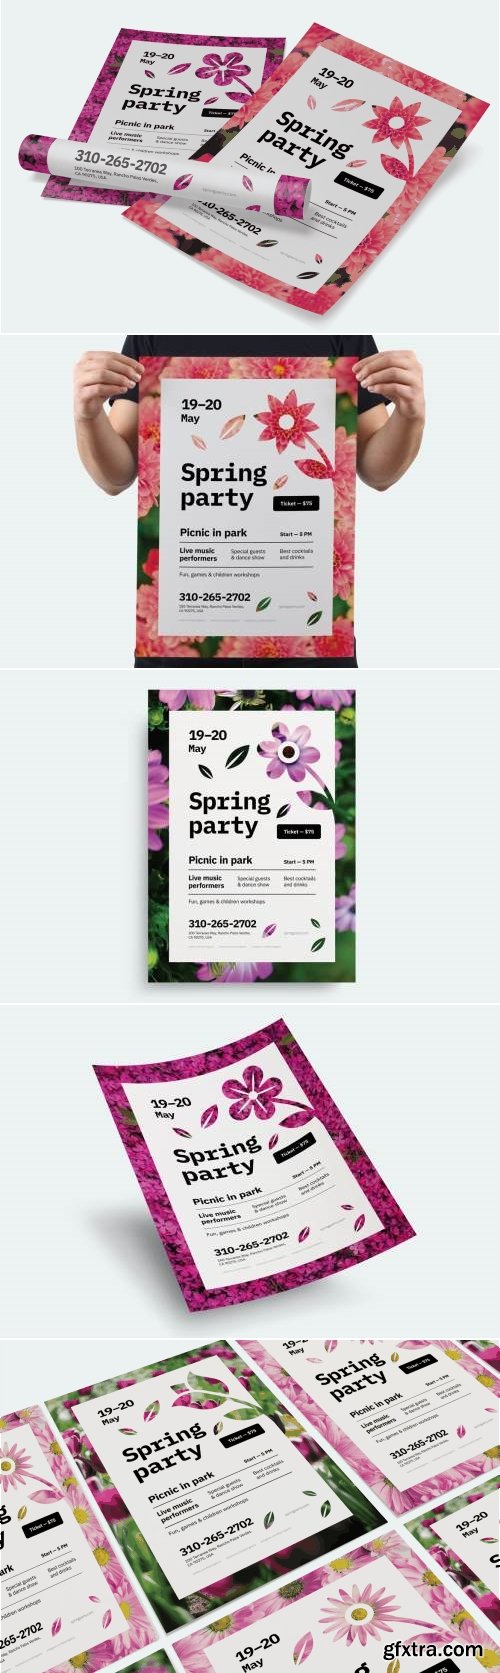 Spring Poster Template